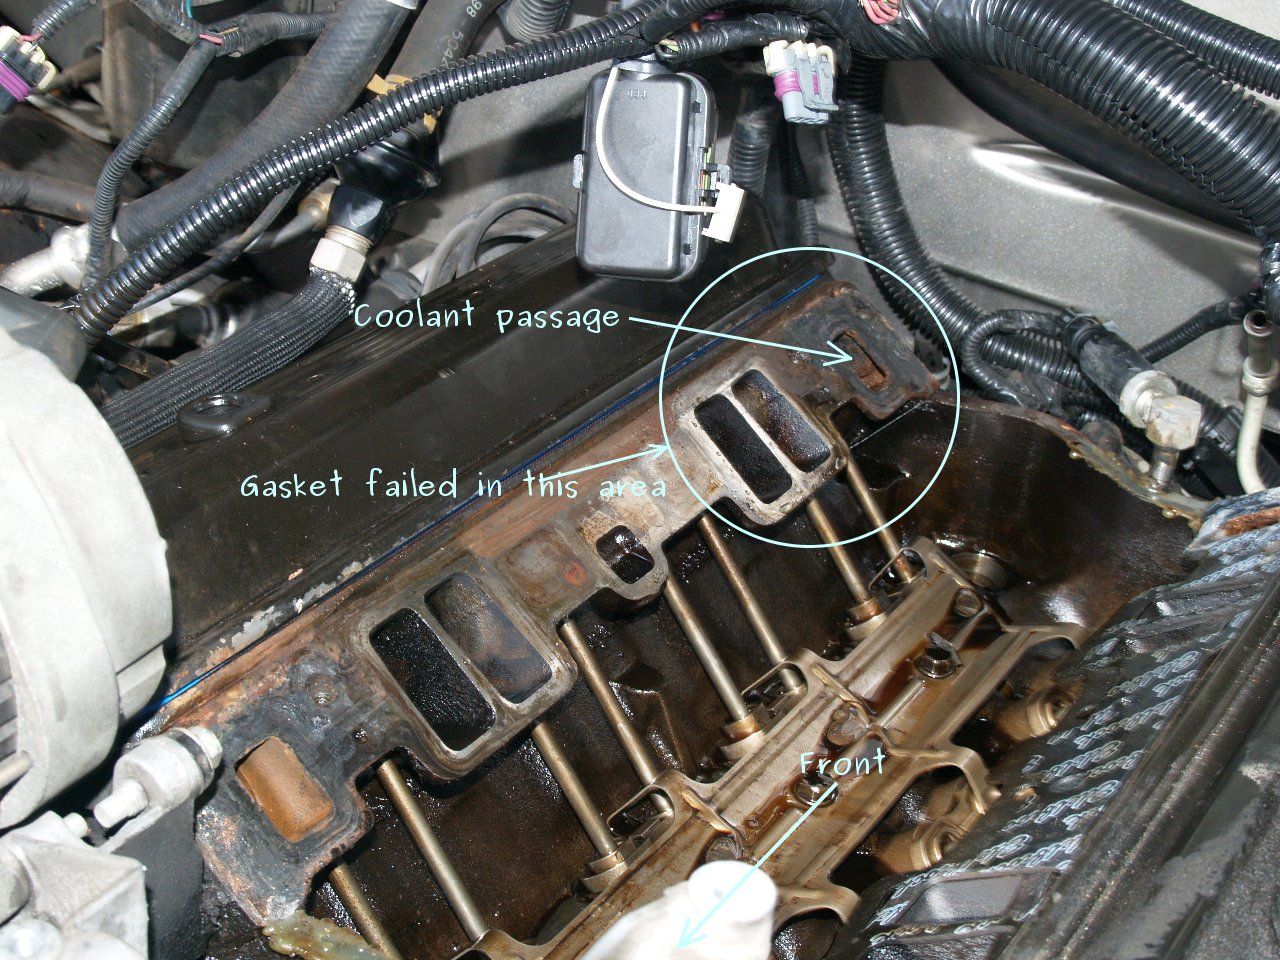 See P0864 in engine